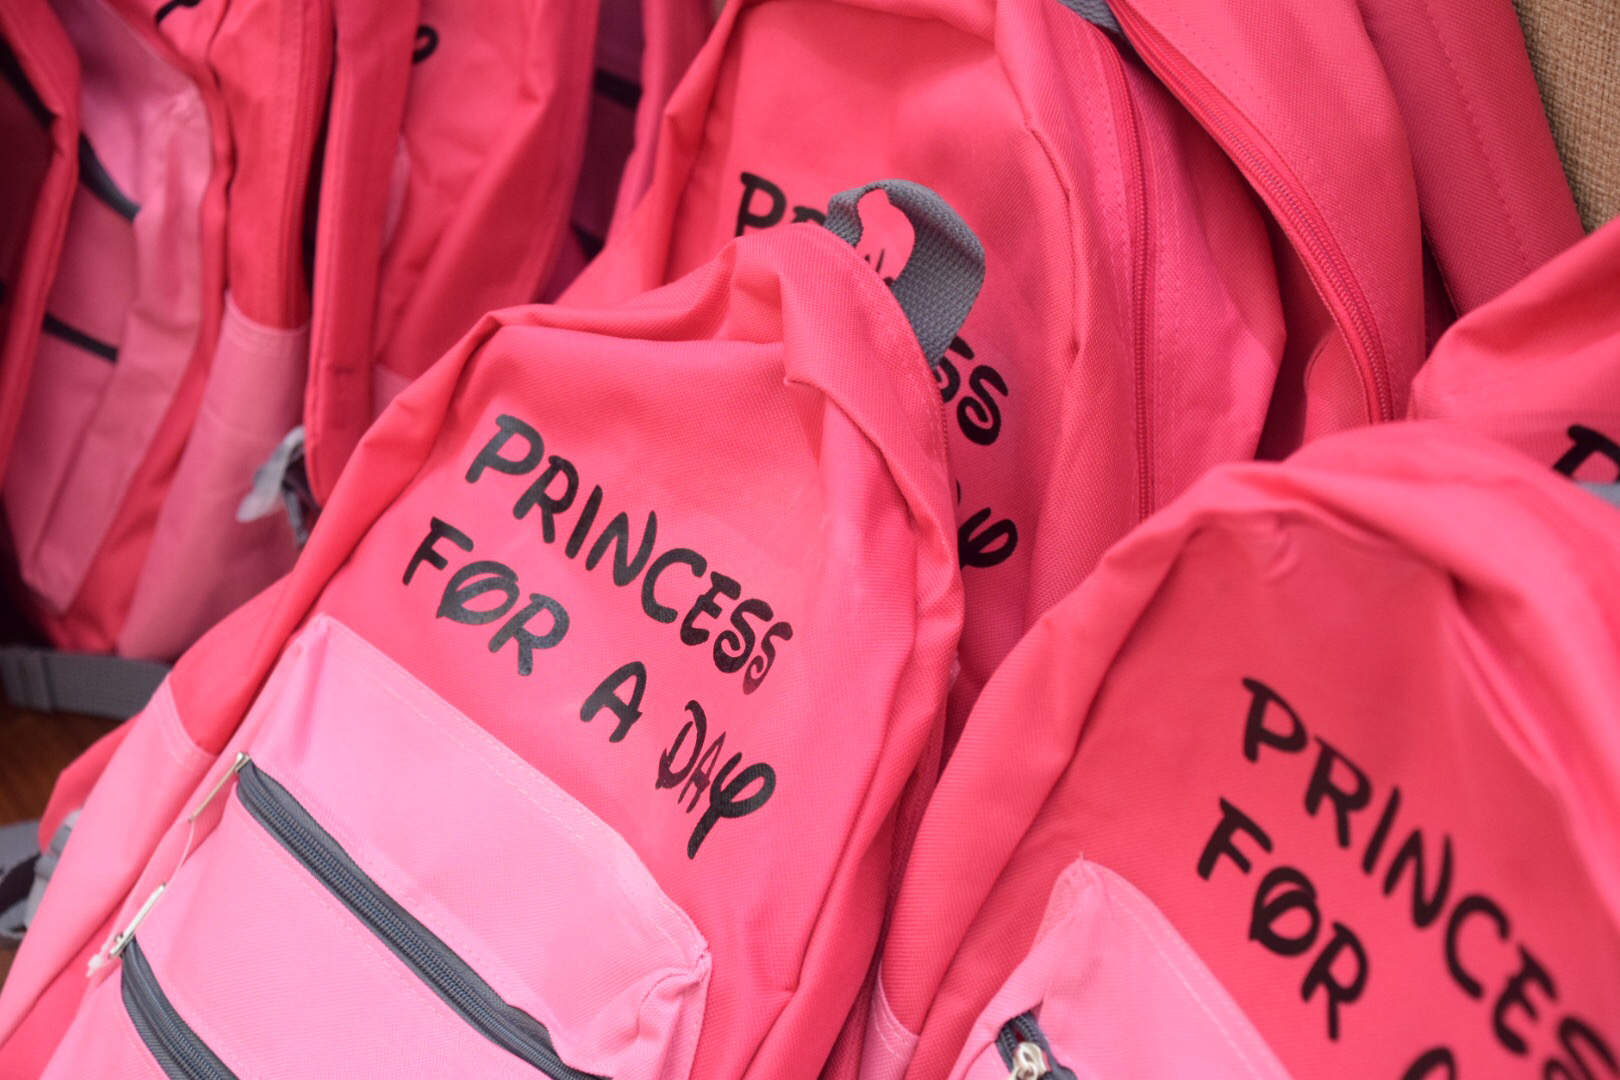 PHOTO: Attendees received park passes and gift bags made by Jordan West, 7, who held multiple fundraisers to pay for 13 girls to attend a full day at Walt Disney World in Orlando, Fla.